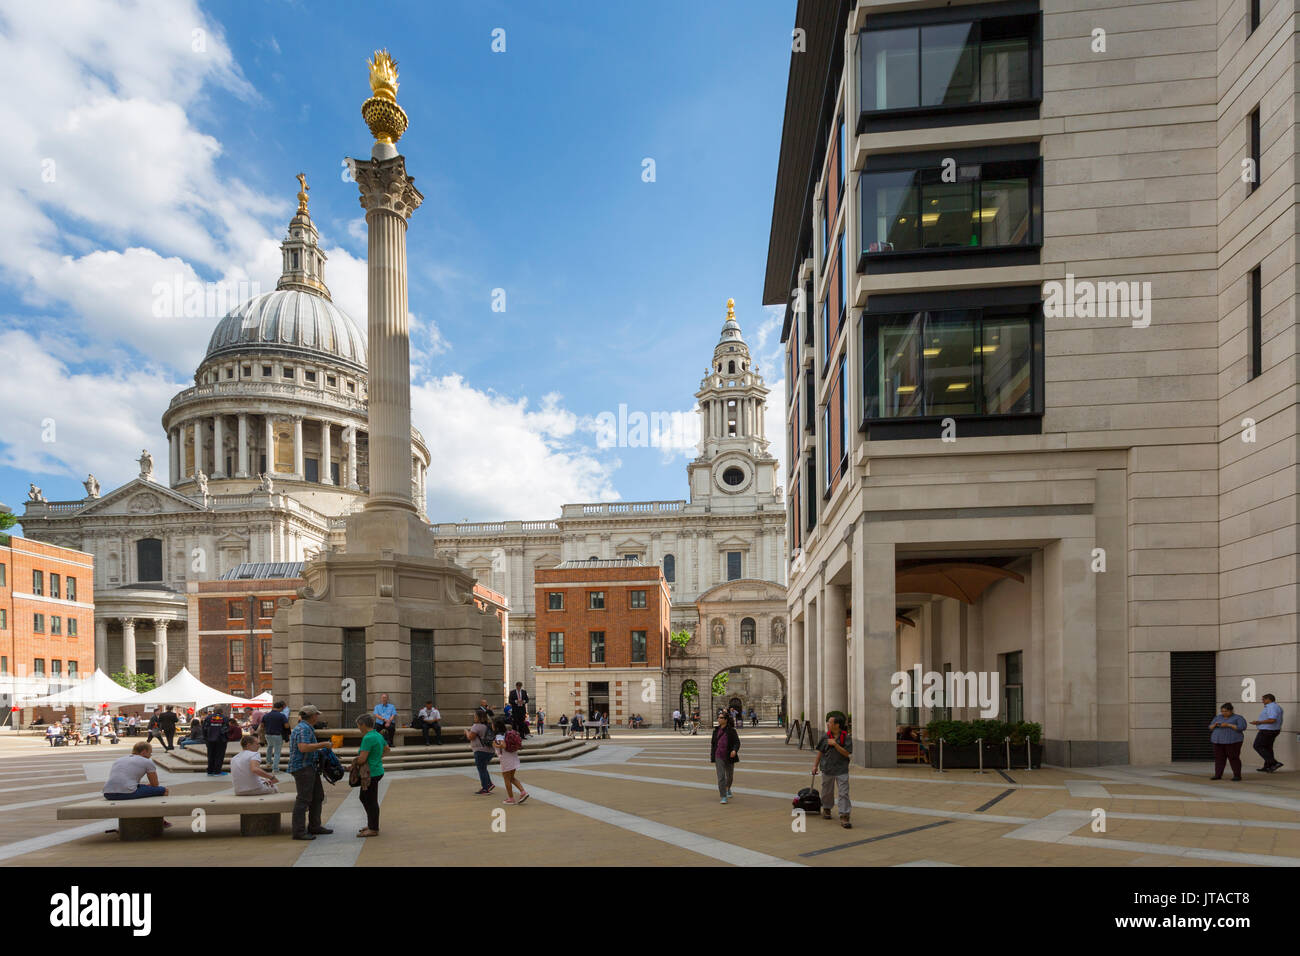 View of St. Paul's Cathedral and Paternoster Square, City of London, London, England, United Kingdom, Europe Stock Photo